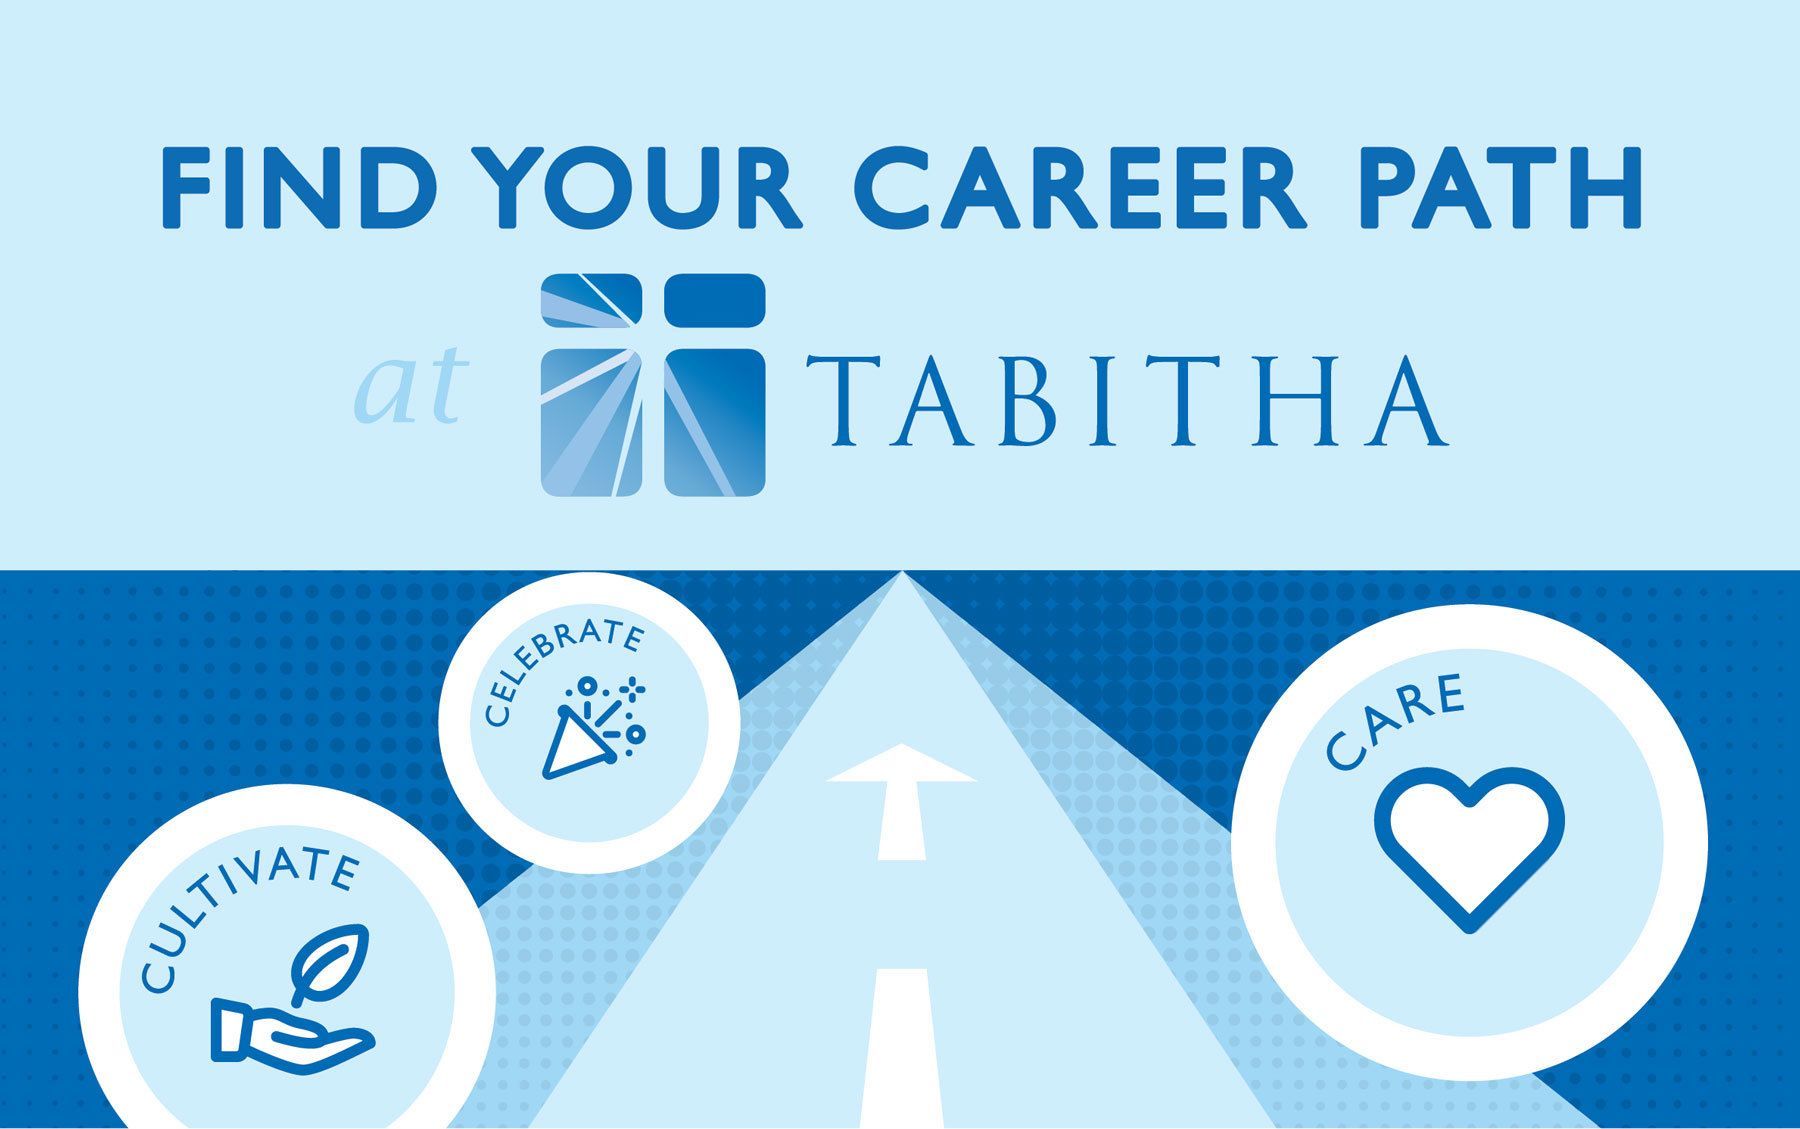 Find your career path at Tabitha